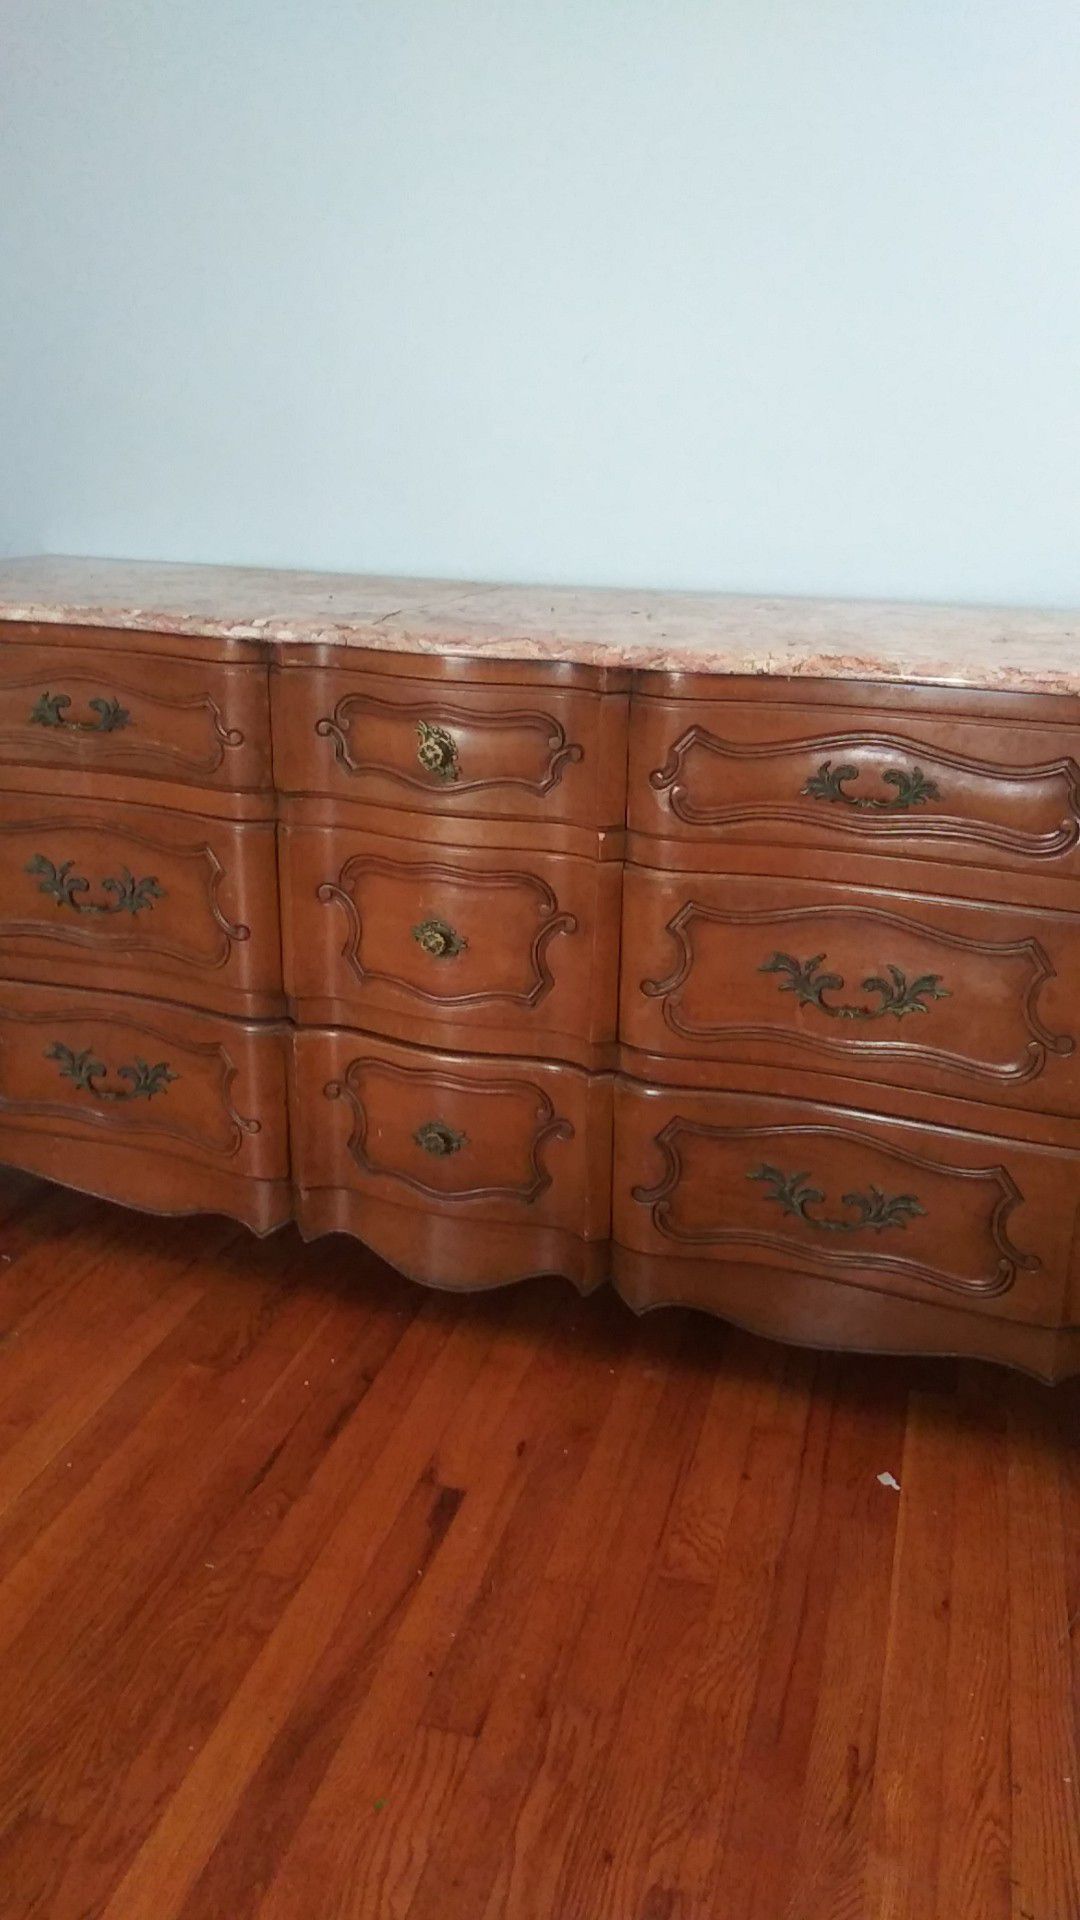 Antique chest of draws and dresser